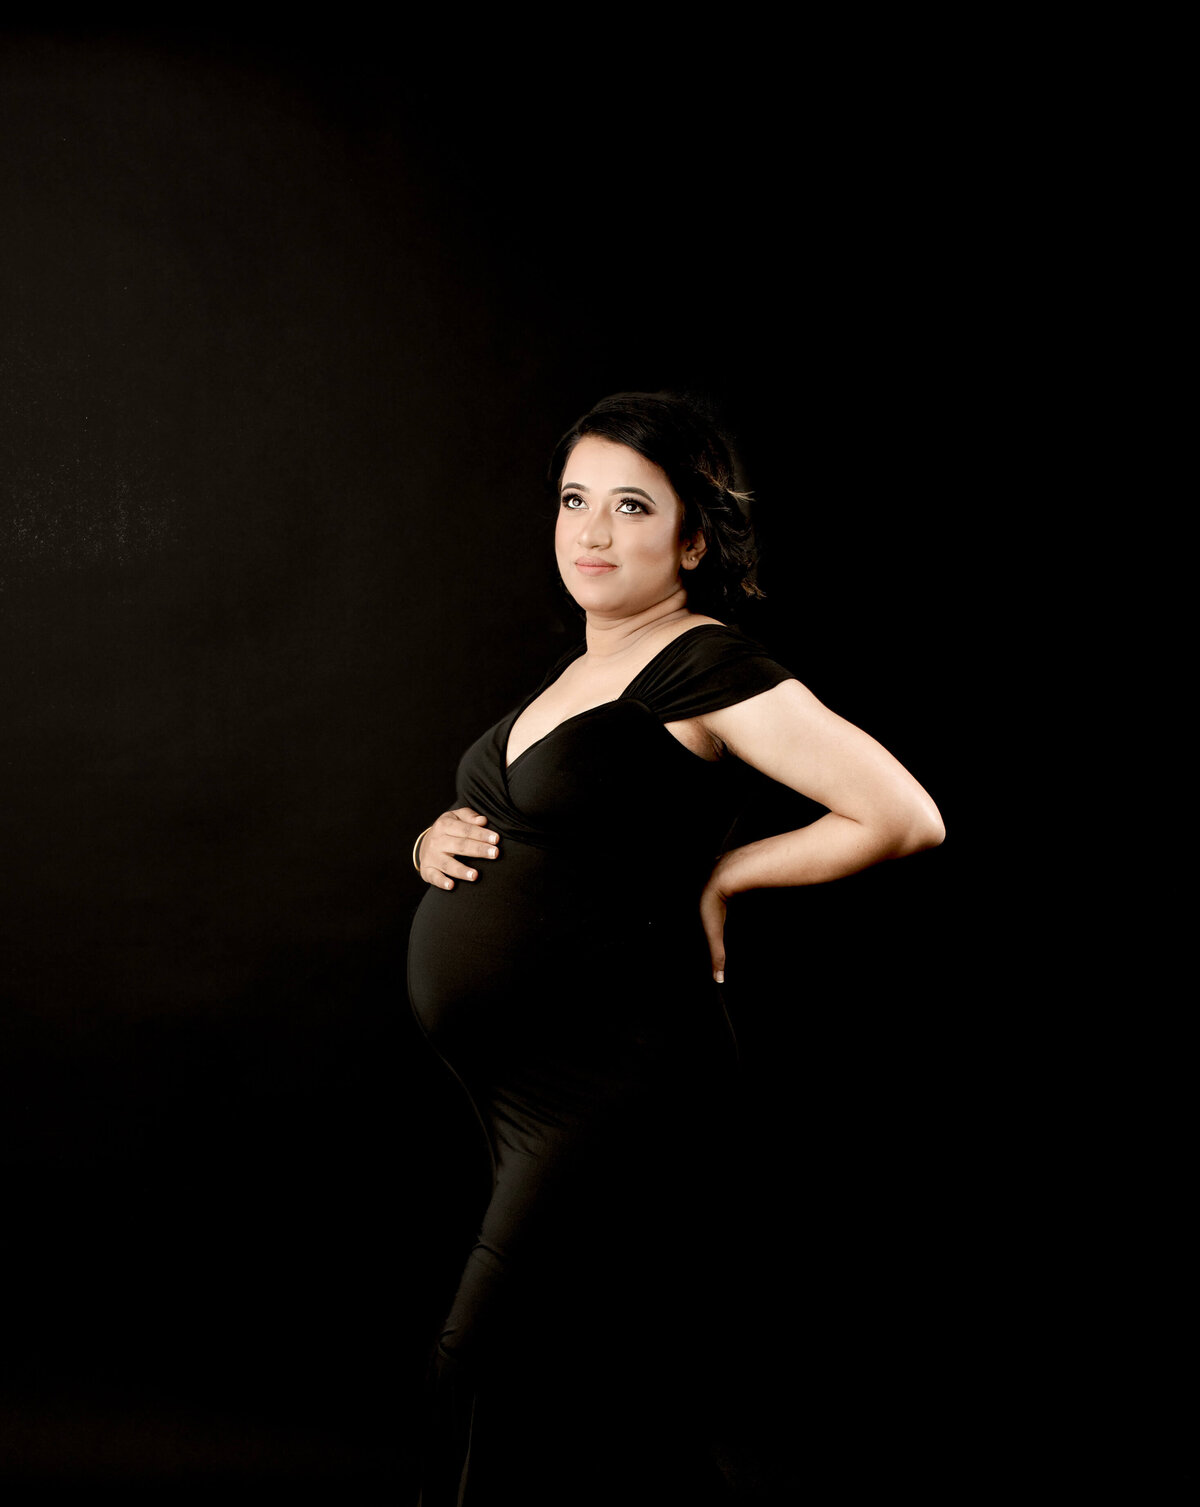 Maternity Photoshoot with mum-to-be in a black maternity gown on a dark backdrop for a maternity photoshoot by  Lauren Vanier Photography